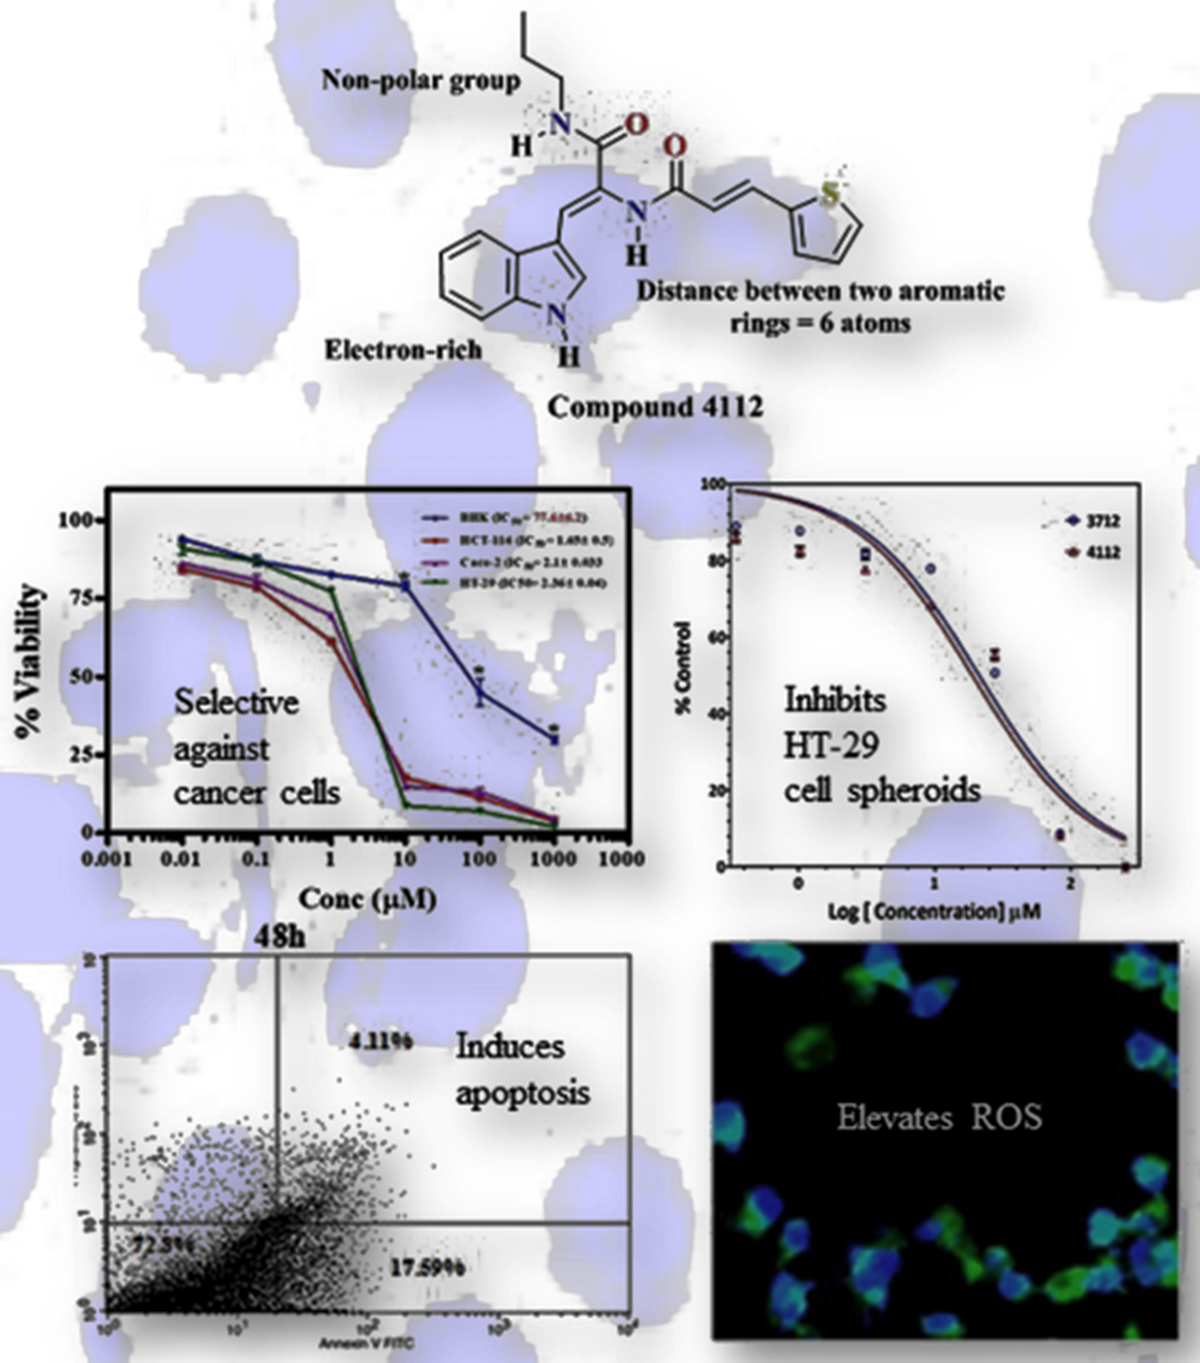 Discovery Optimization And Cellular Activities Of 2 Aroylamino Cinnamamide Derivatives Against Colon Cancer V1 Preprints